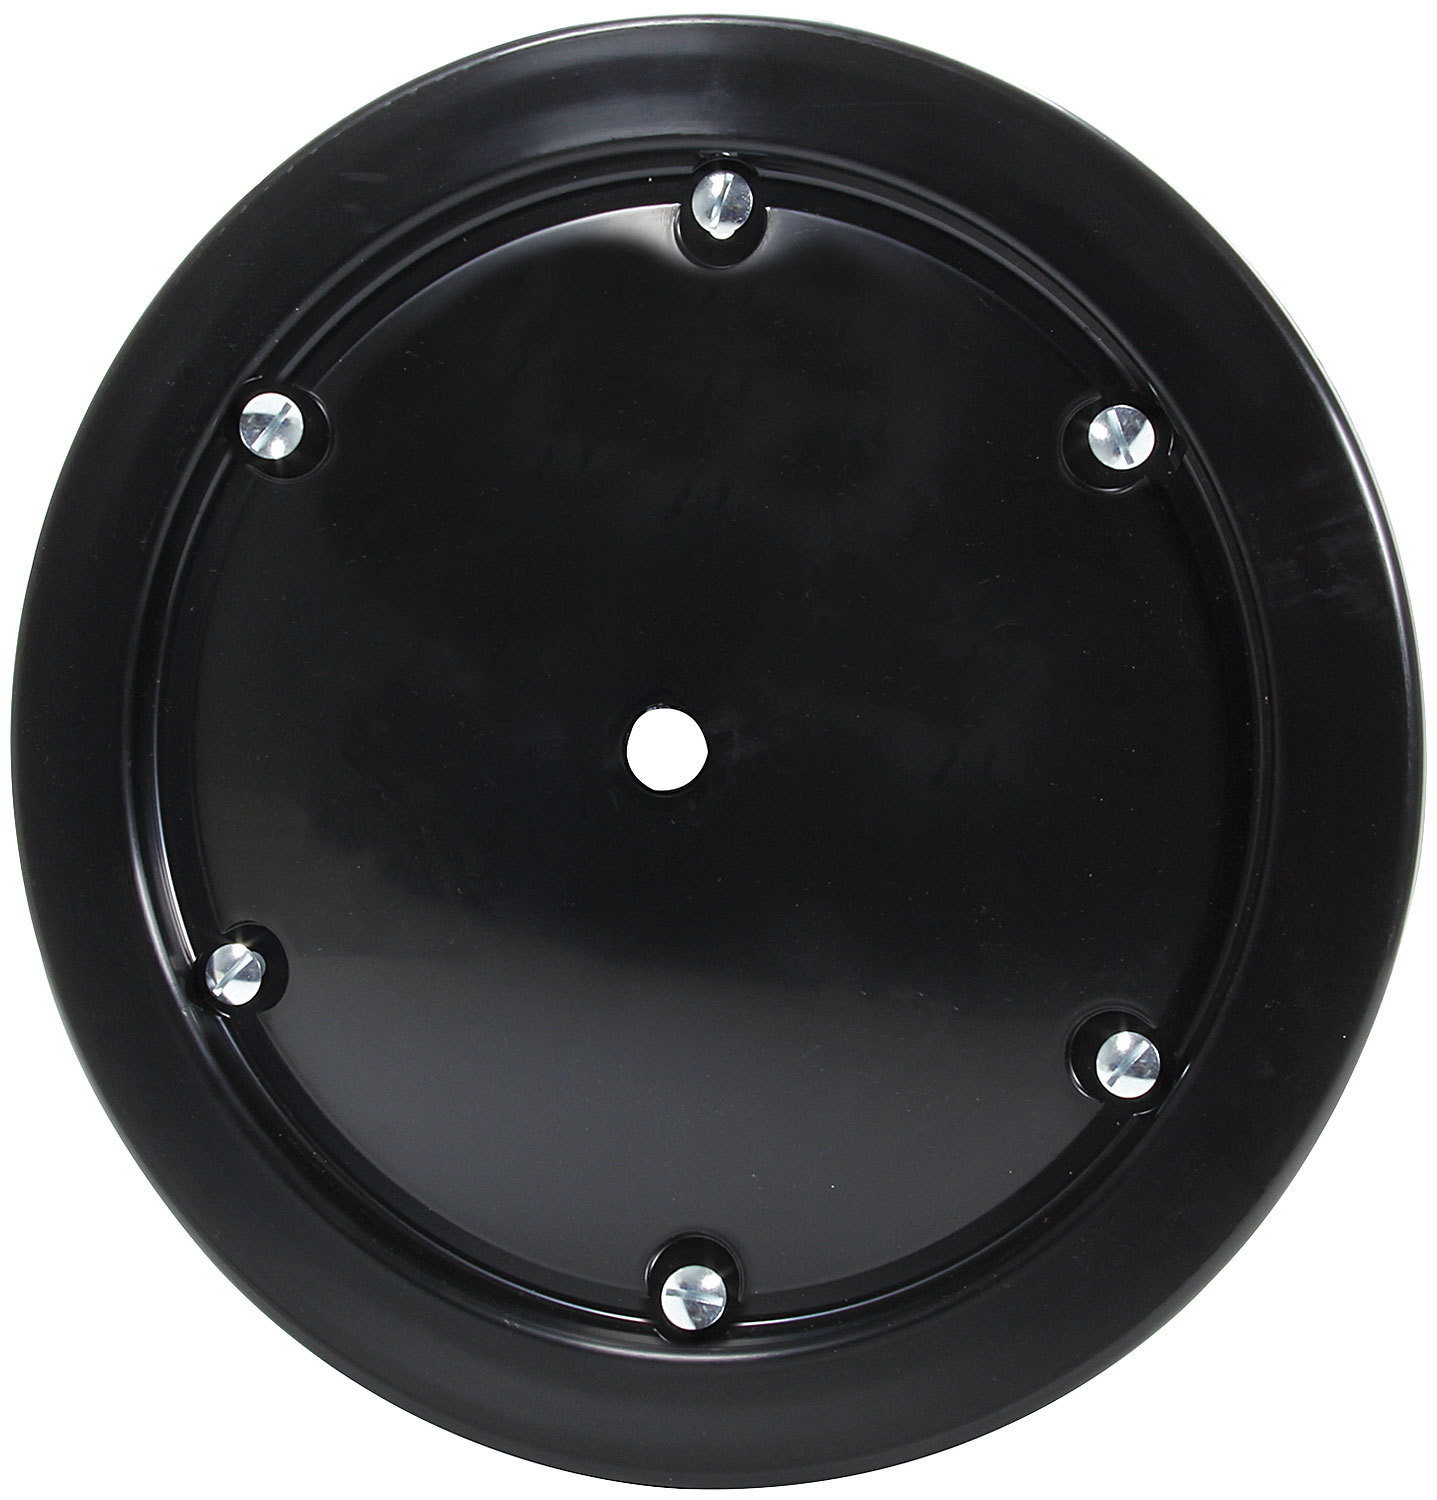 Allstar Performance 44246 Mud Cover, 6 Quick Release Fasteners, Plastic, Black, 15 in Wheels, Kit